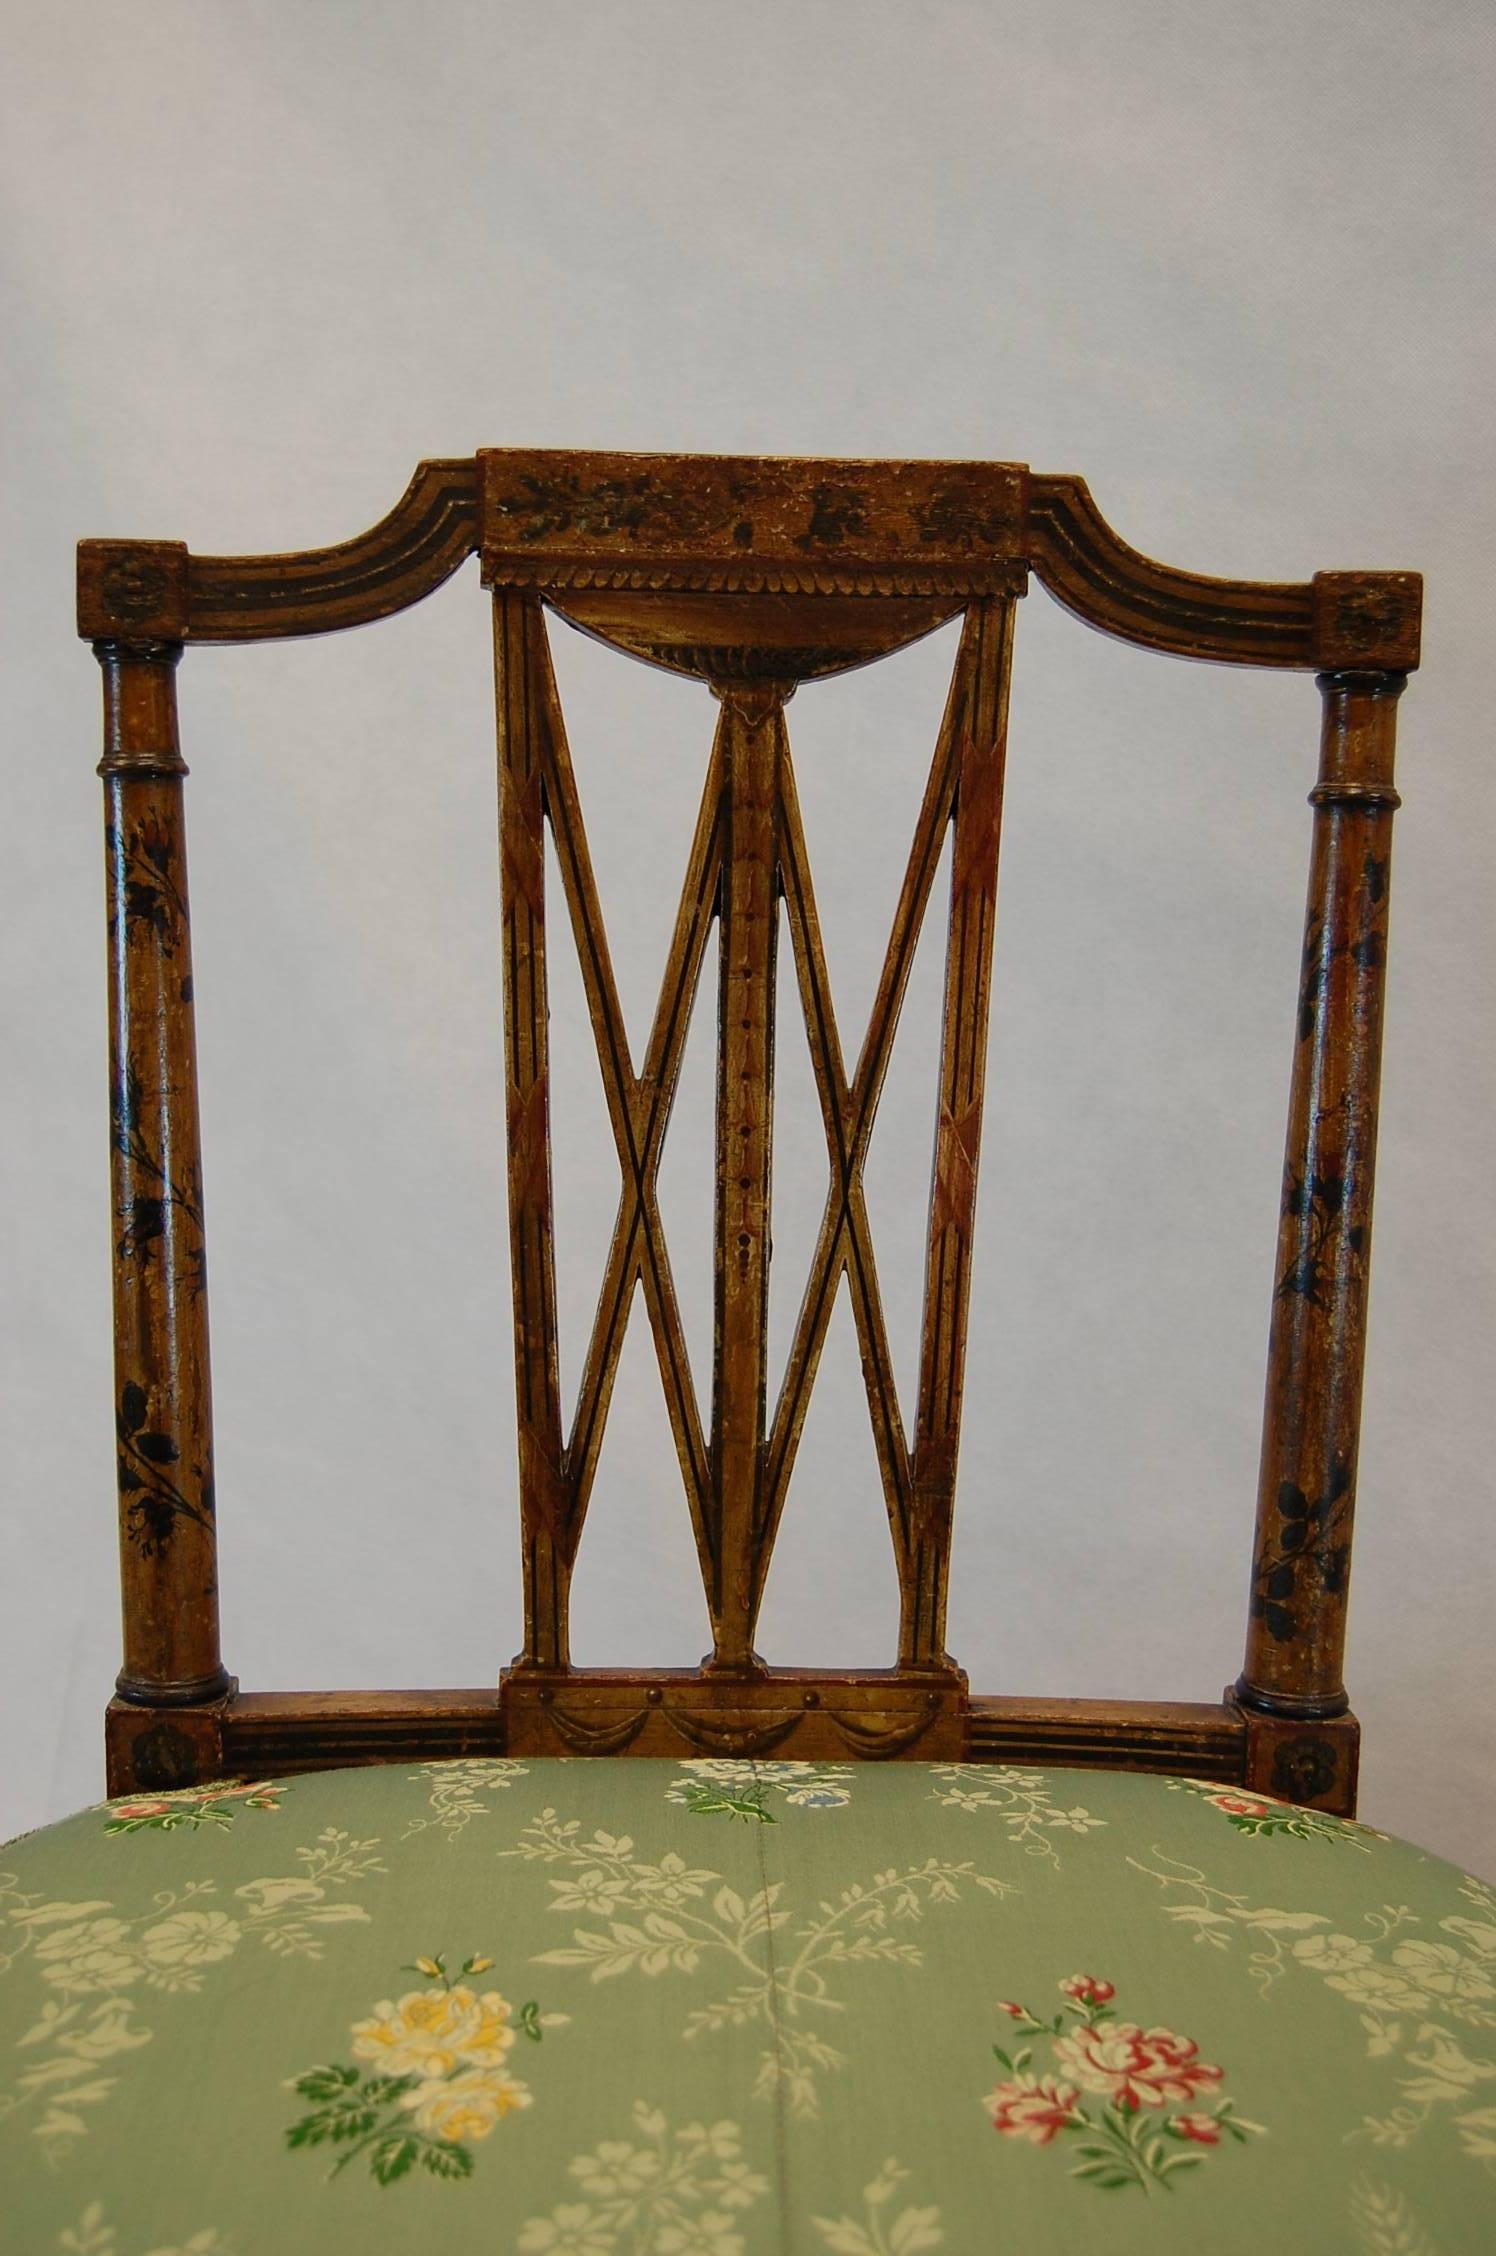 Hepplewhite Pair of Early 19th Century English Chairs with Cane Seats, circa 1800